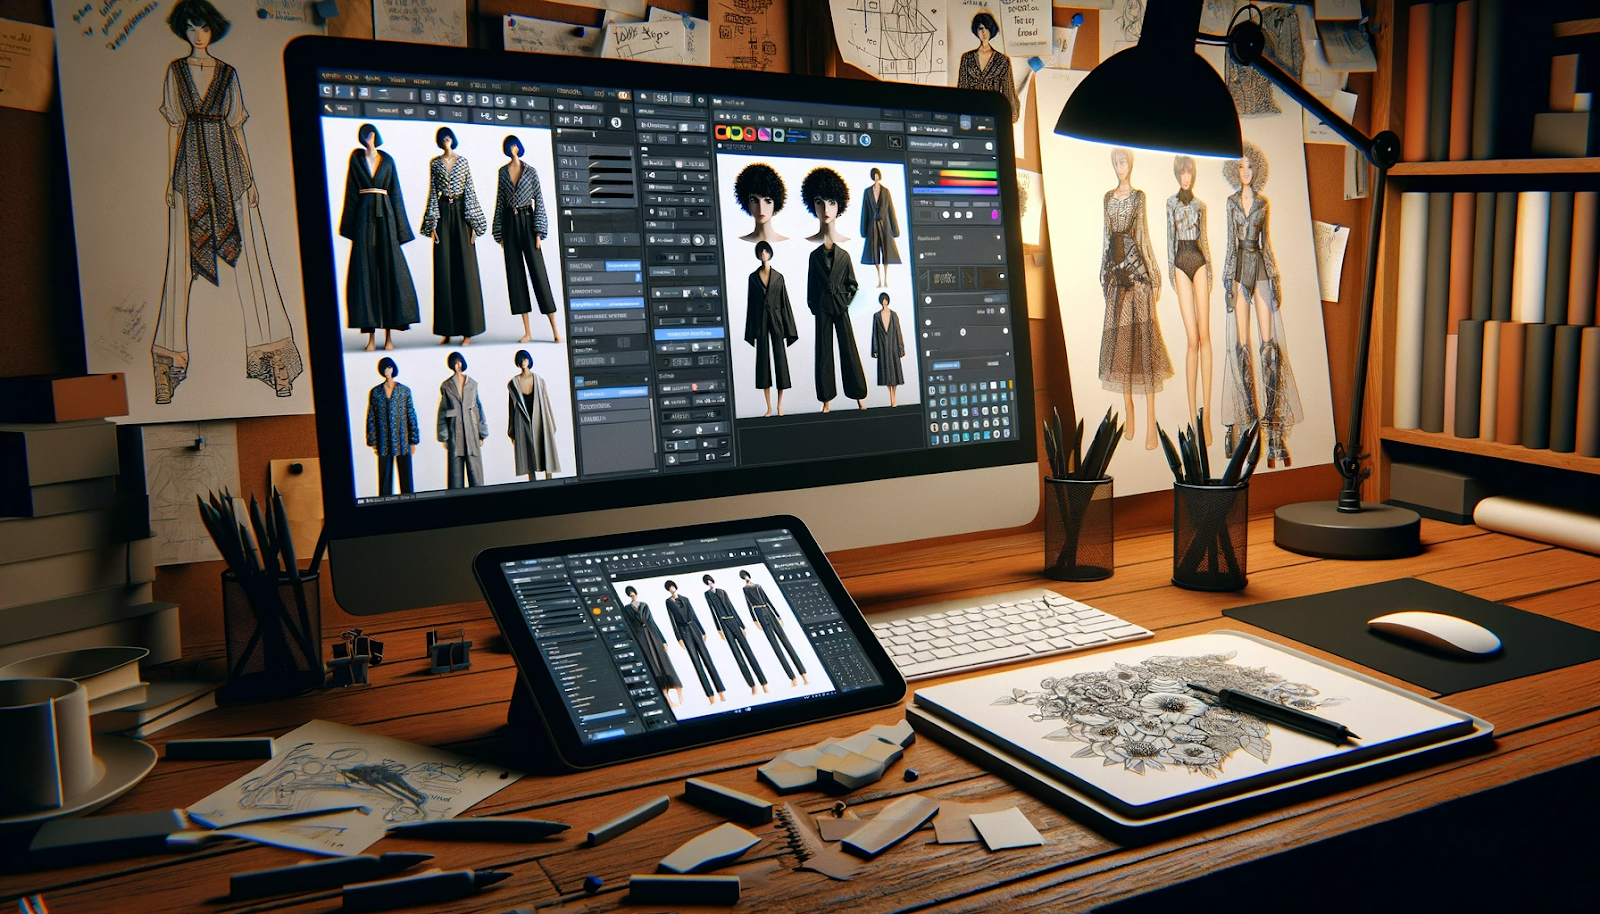 Organized workspace with digital tools and software showing how to create nft clothing.